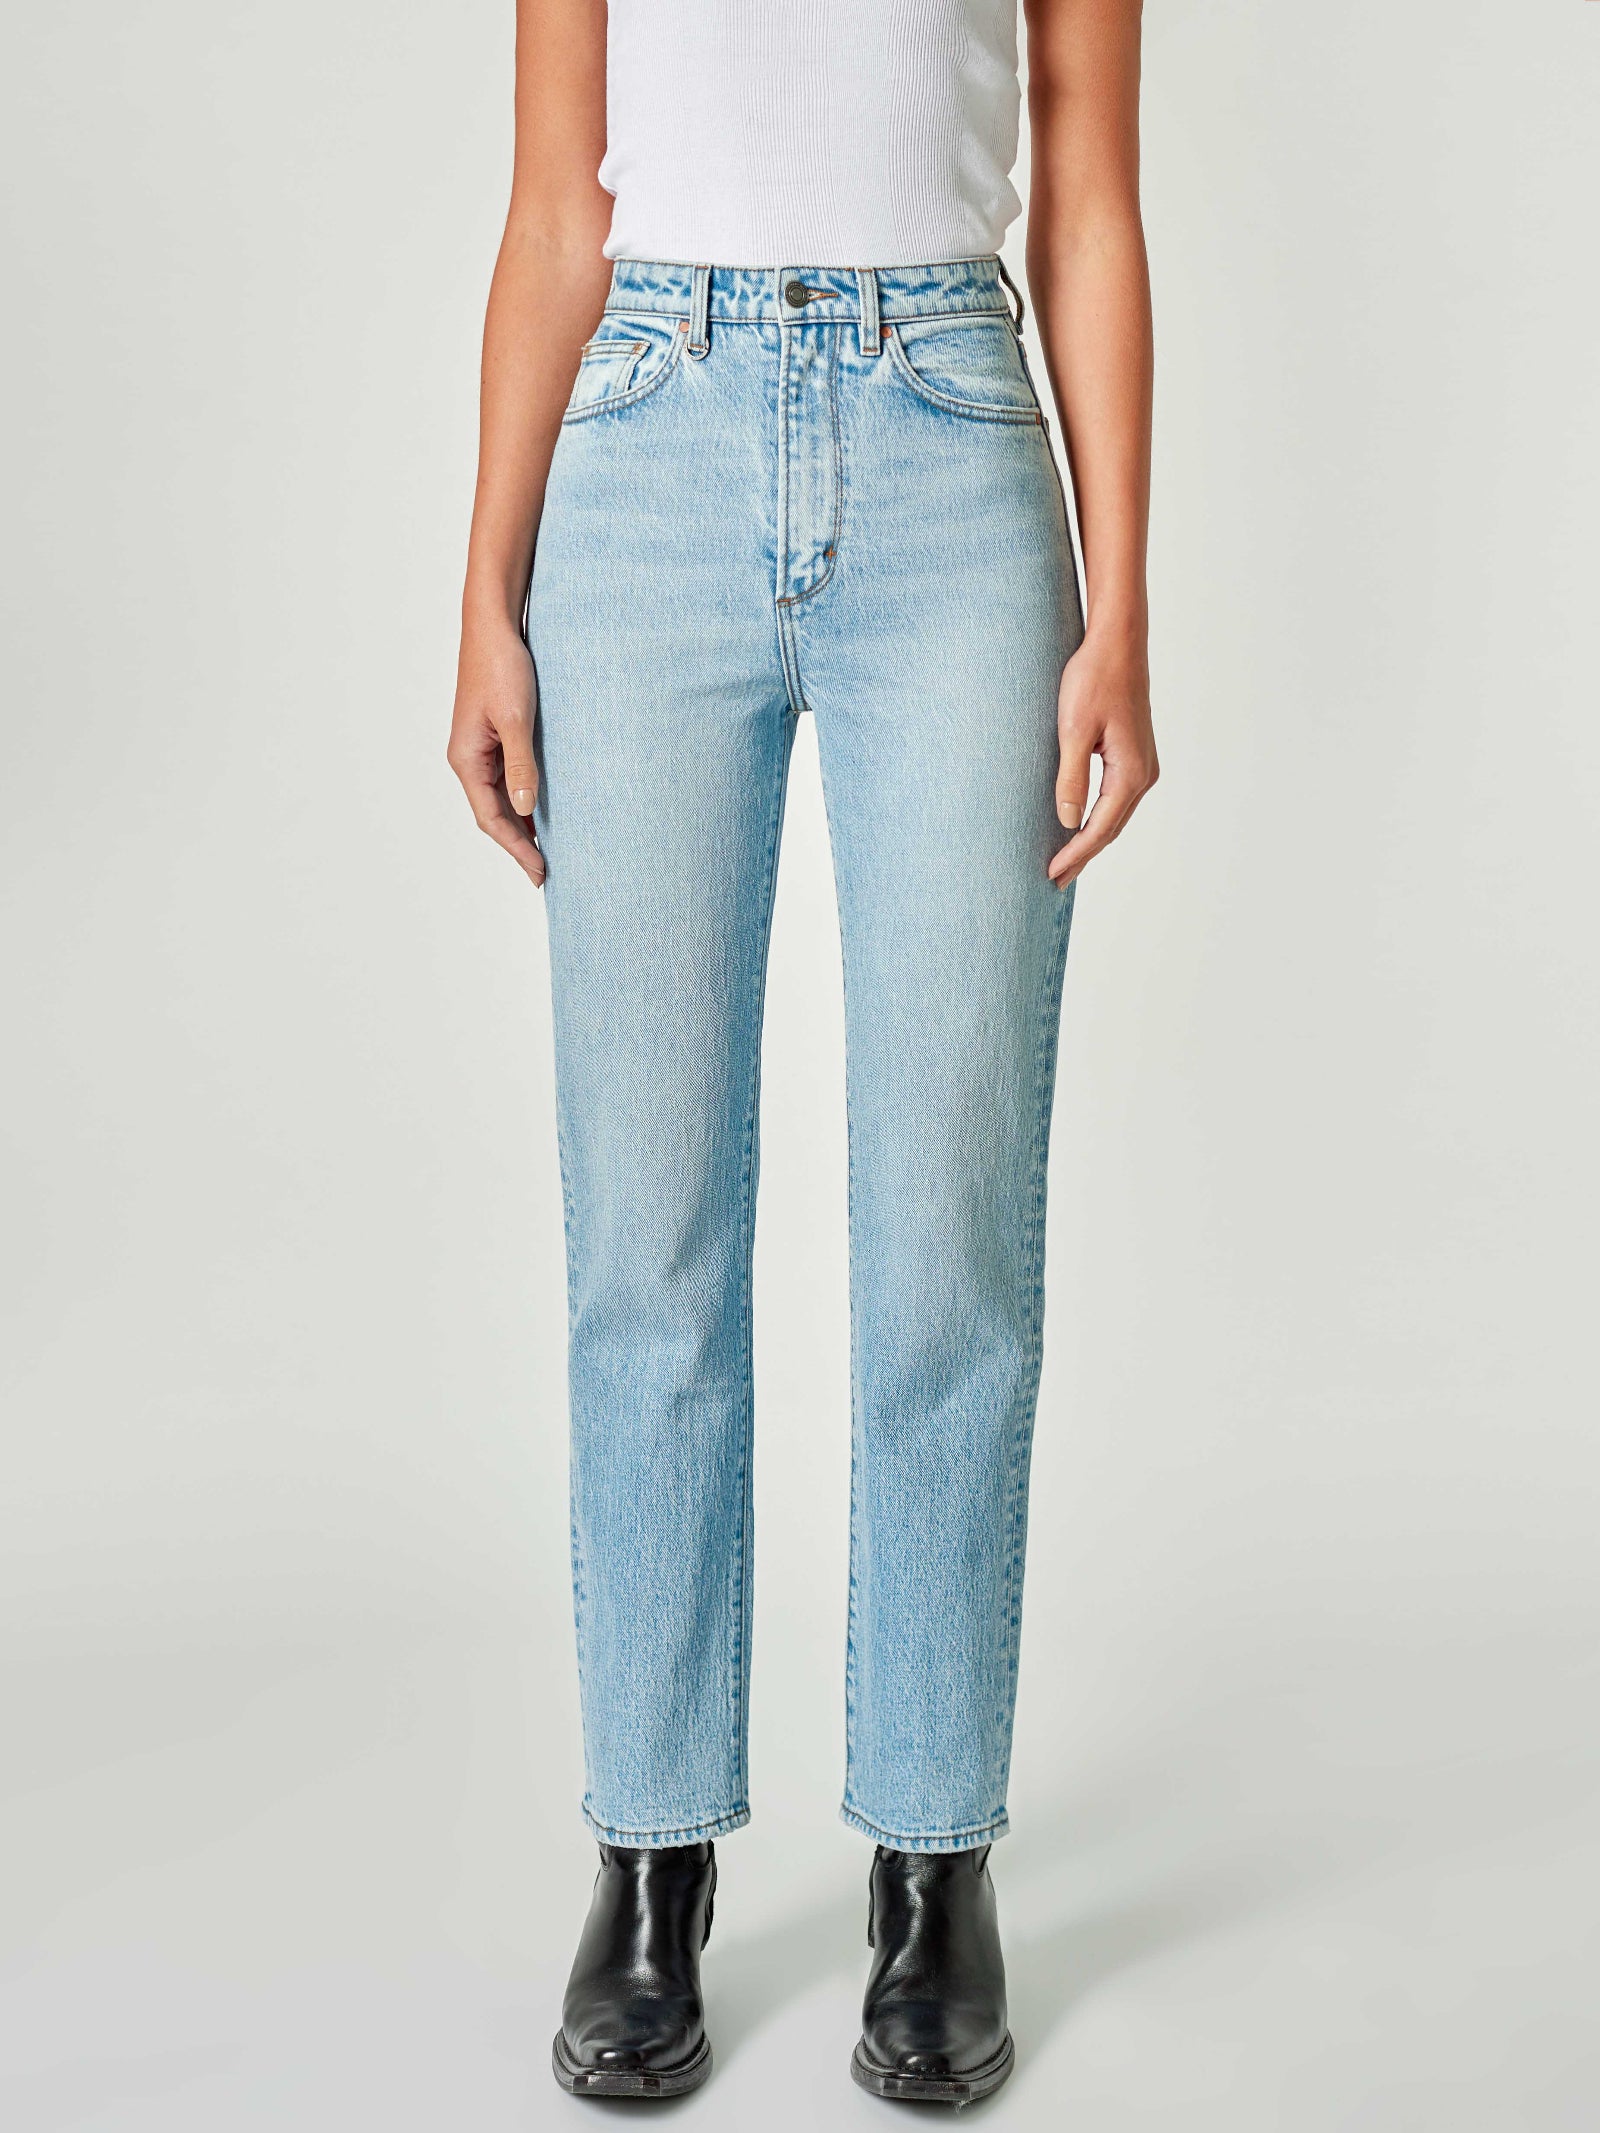 Nico Straight Jeans in Passenger Vintage Blue - Glue Store